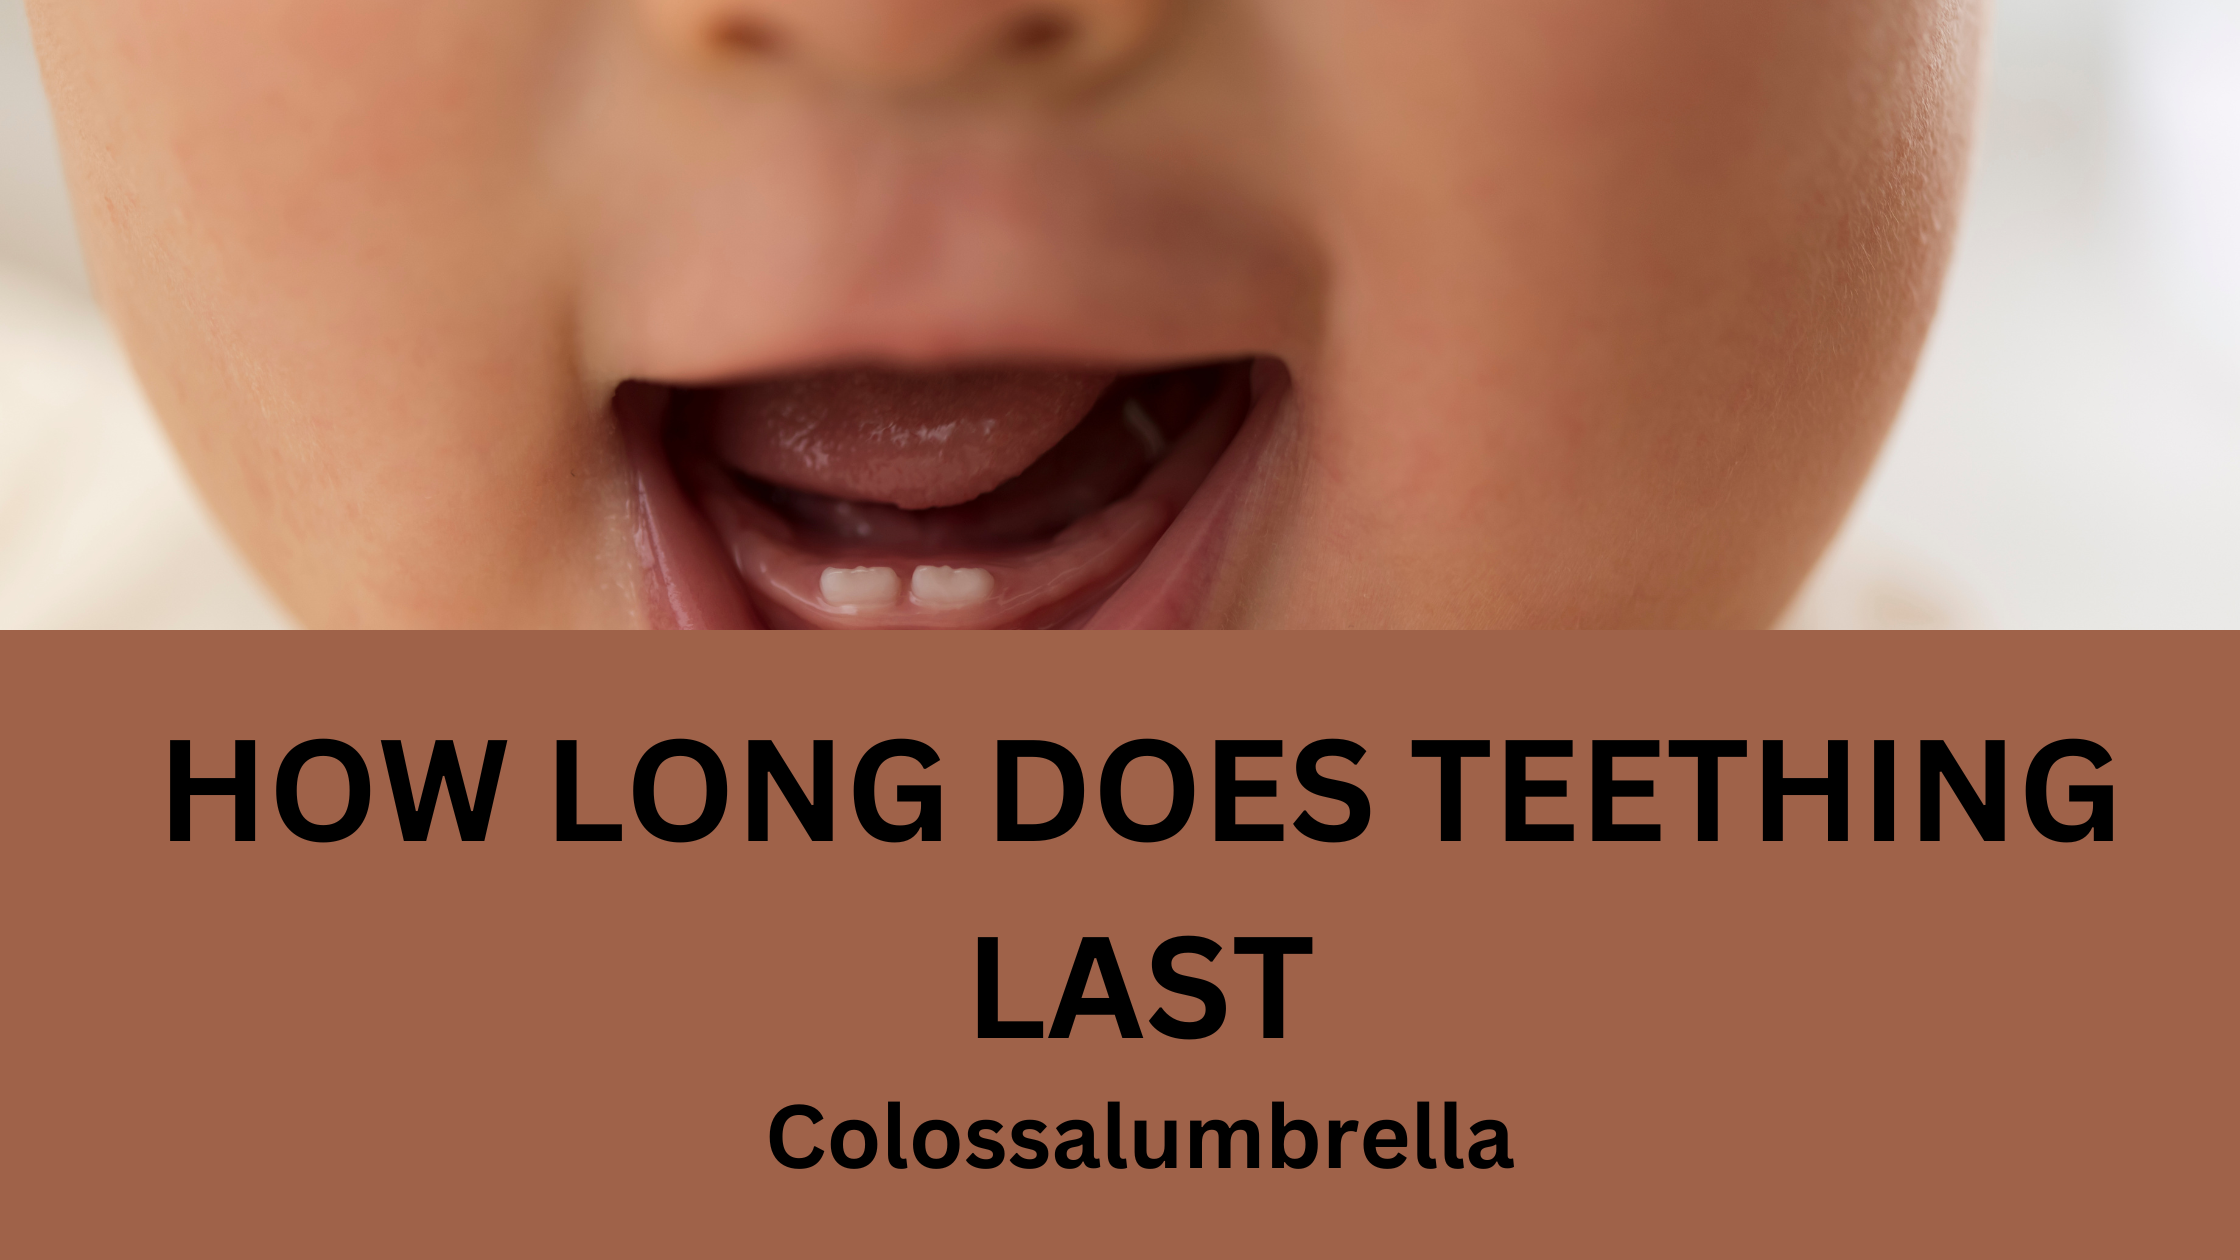 How long does teething last by Colossalumbrella